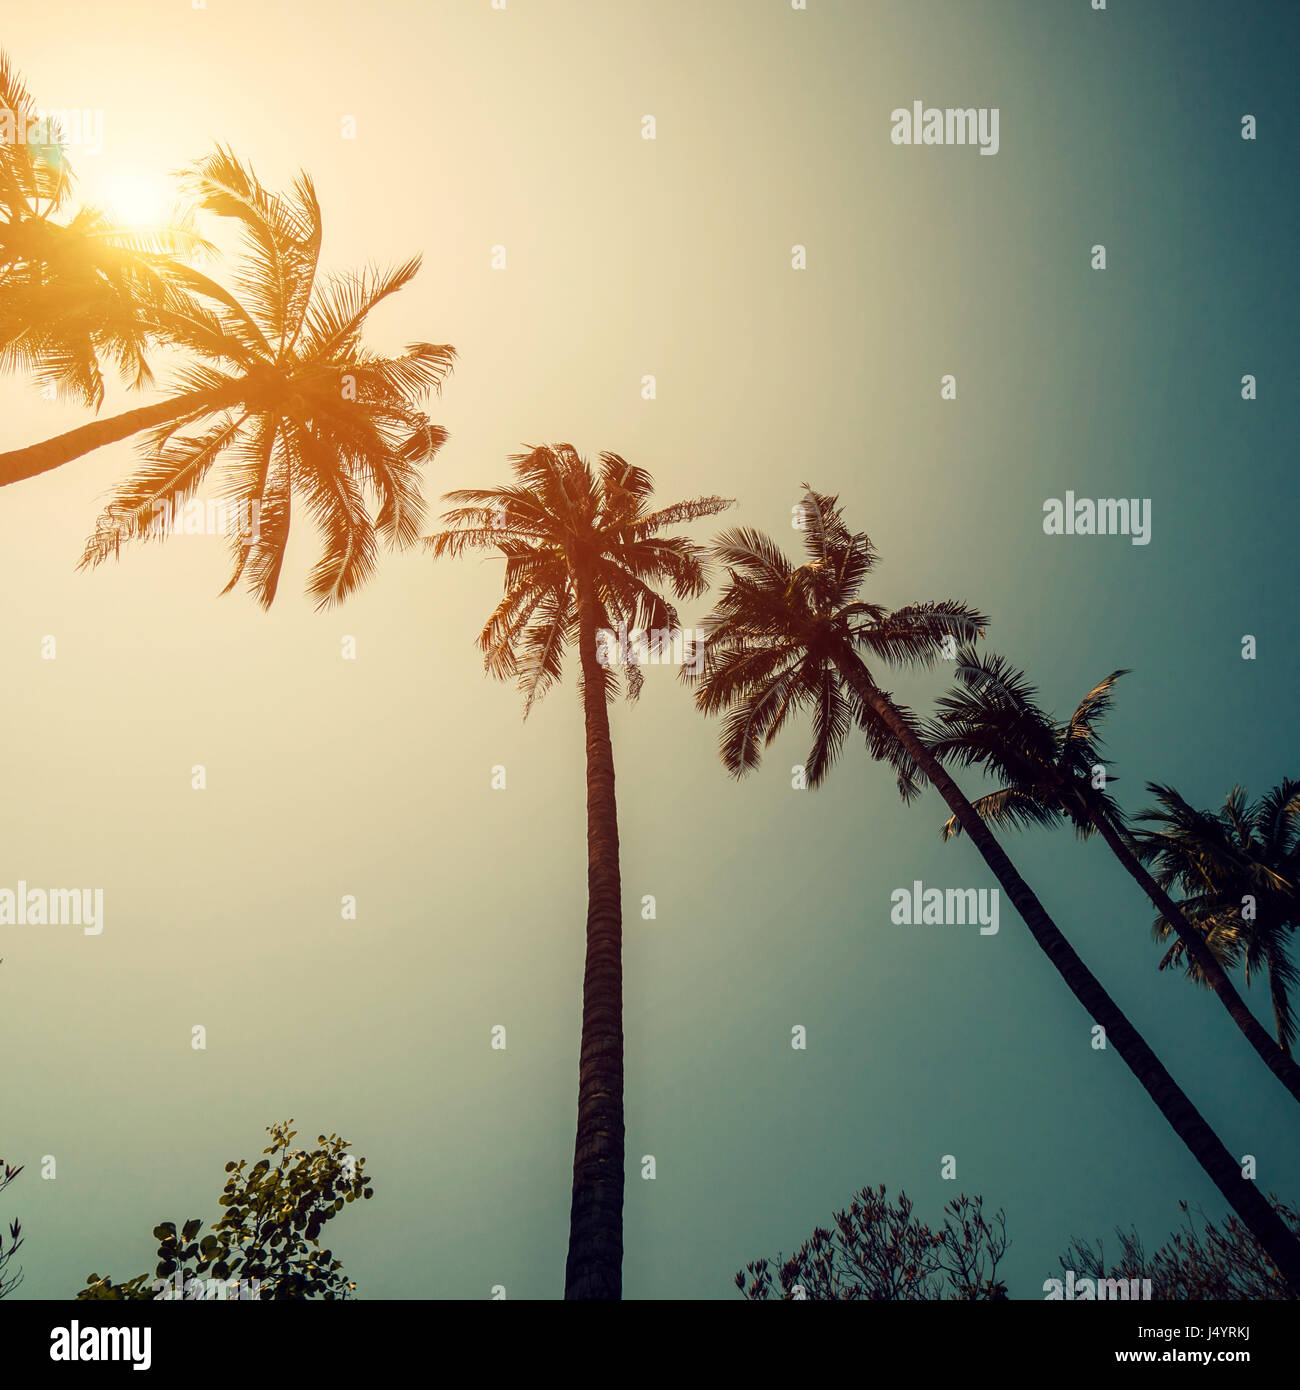 Coconut palm trees at tropical coast with vintage toned and film style. Stock Photo